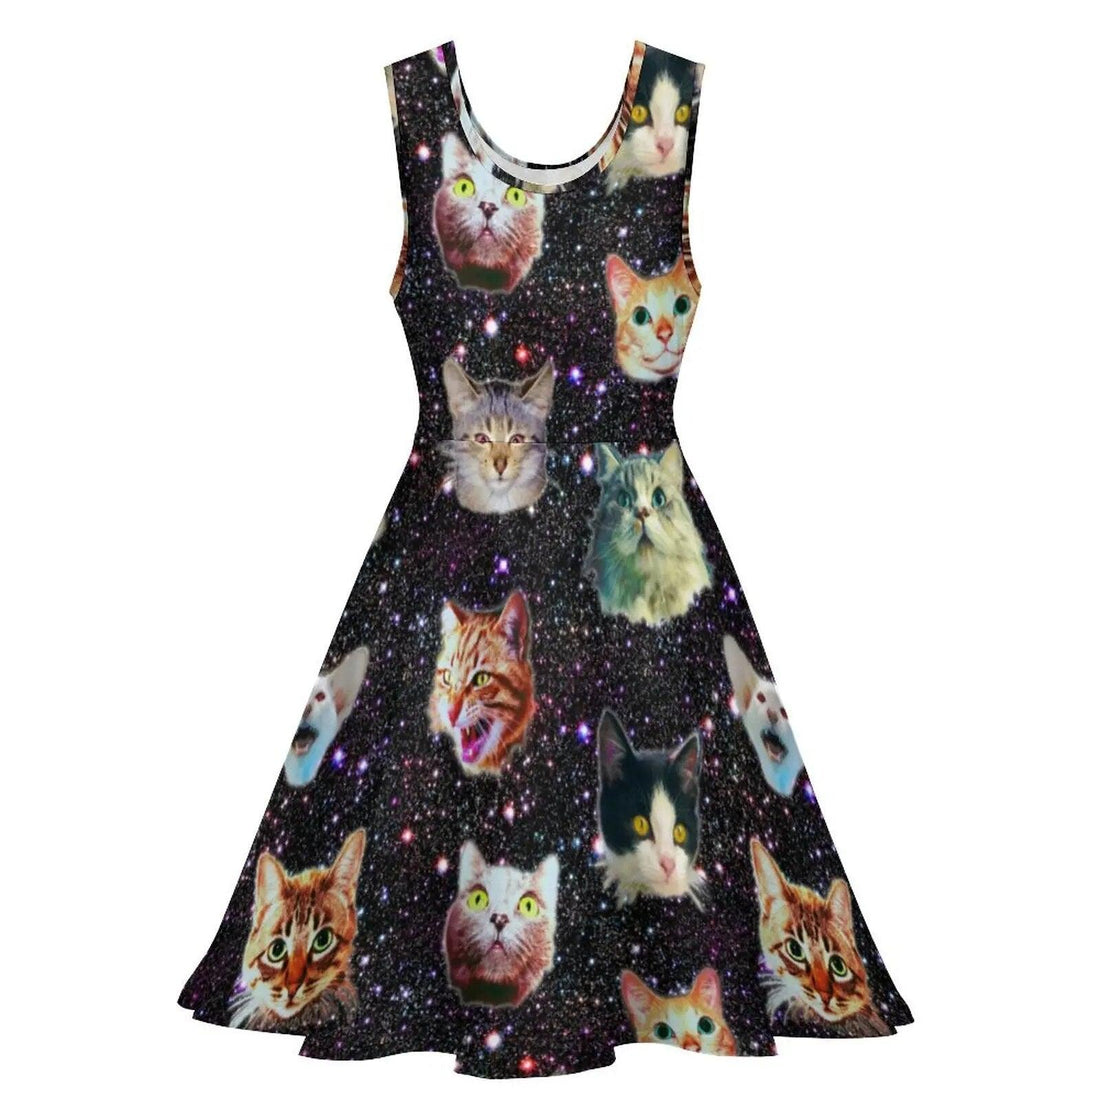 Funny Cat Print Dresses, 10 Designs, XS-5XL - Just Cats - Gifts for Cat Lovers